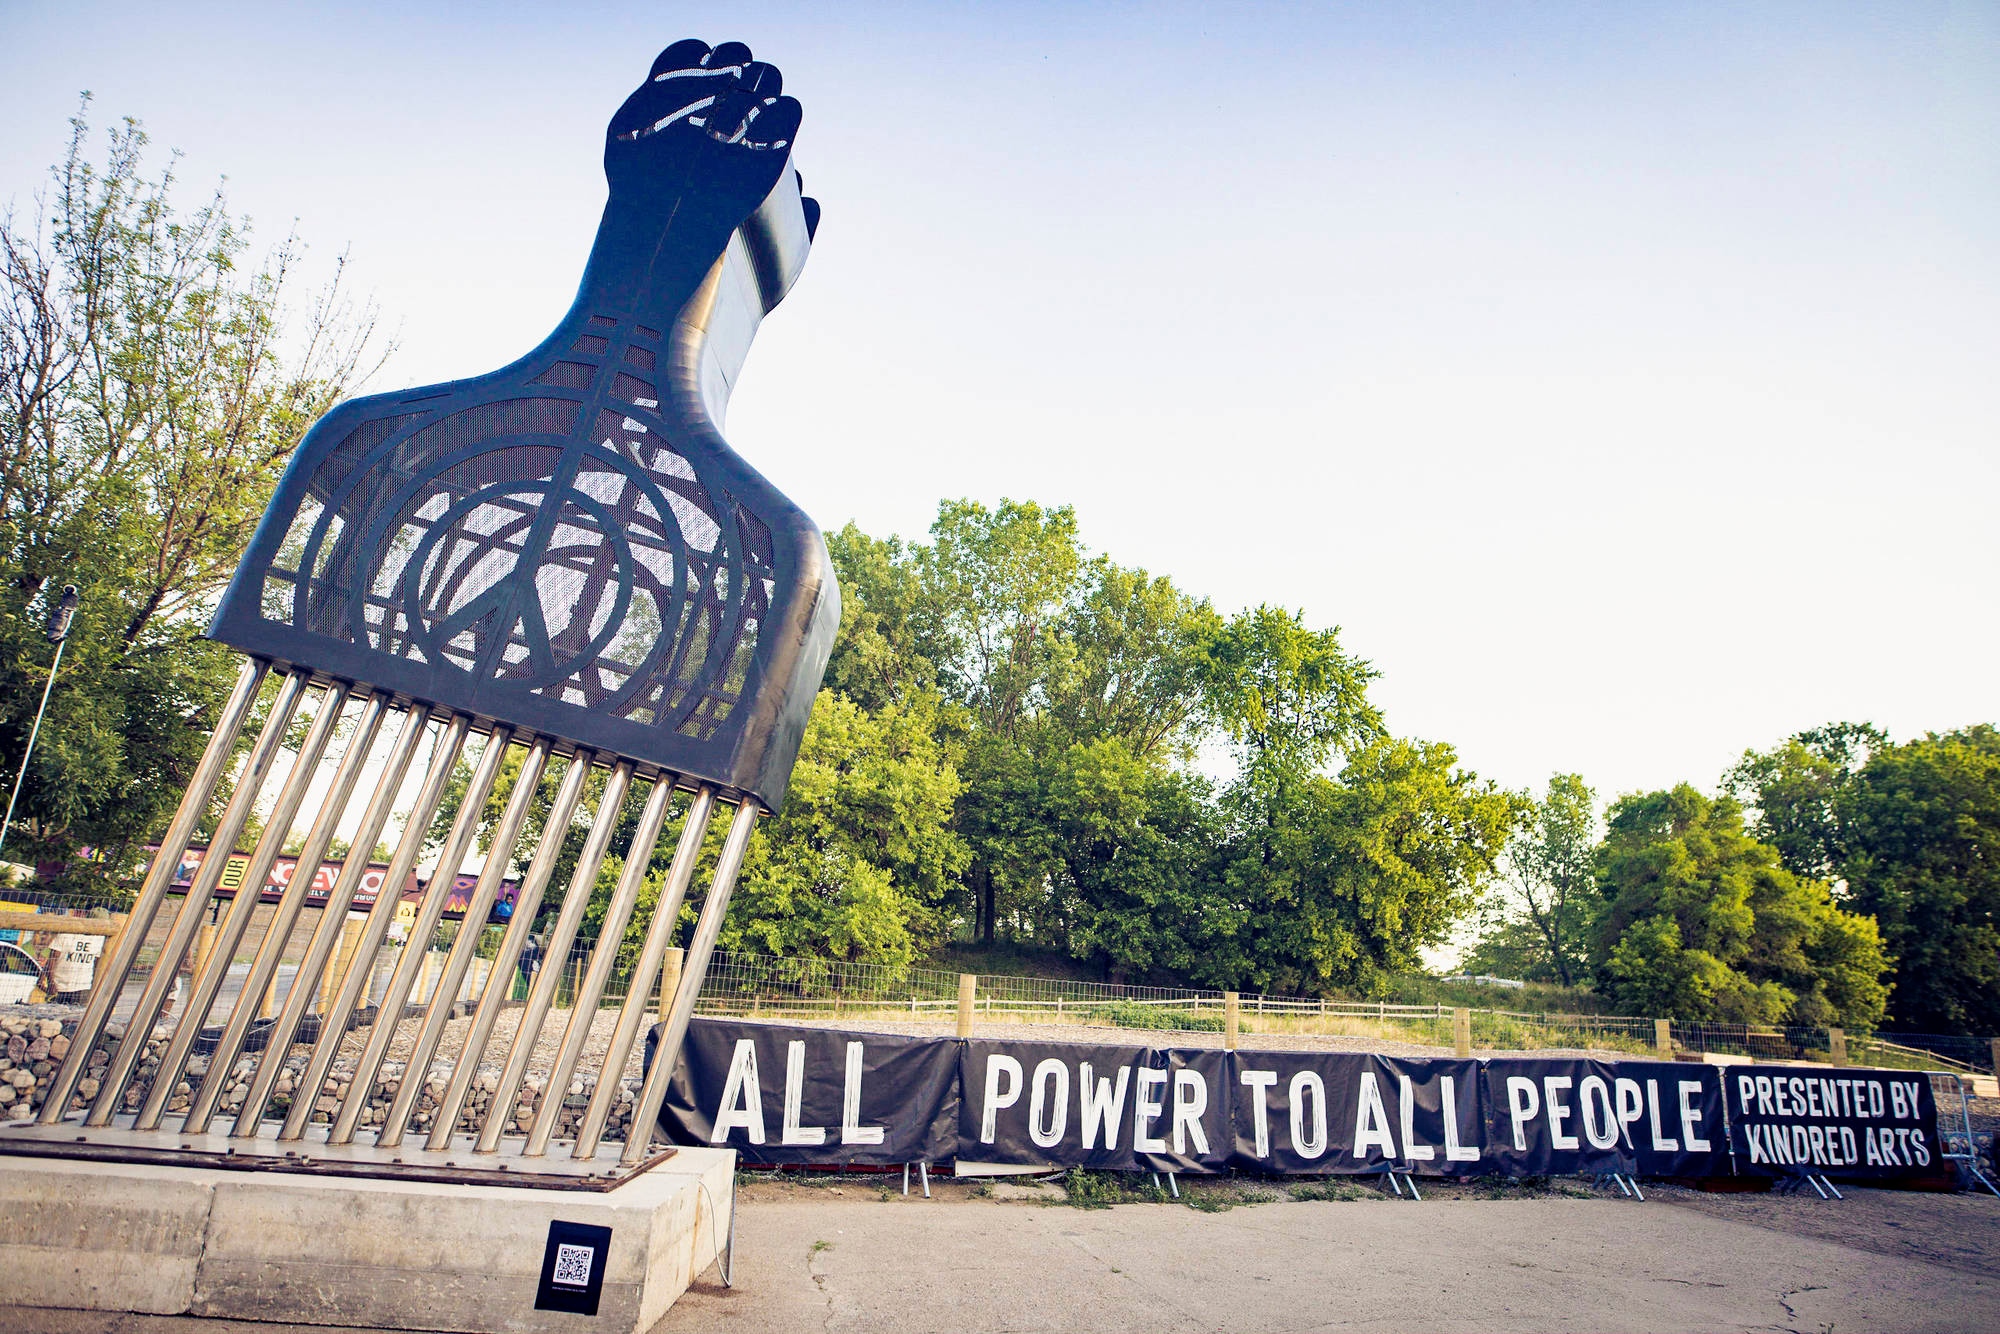 All Power to All People, by Hank Willis Thomas, at Englewood Village Plaza, 5801 S. Halsted. Photos courtesy of Kindred Arts.